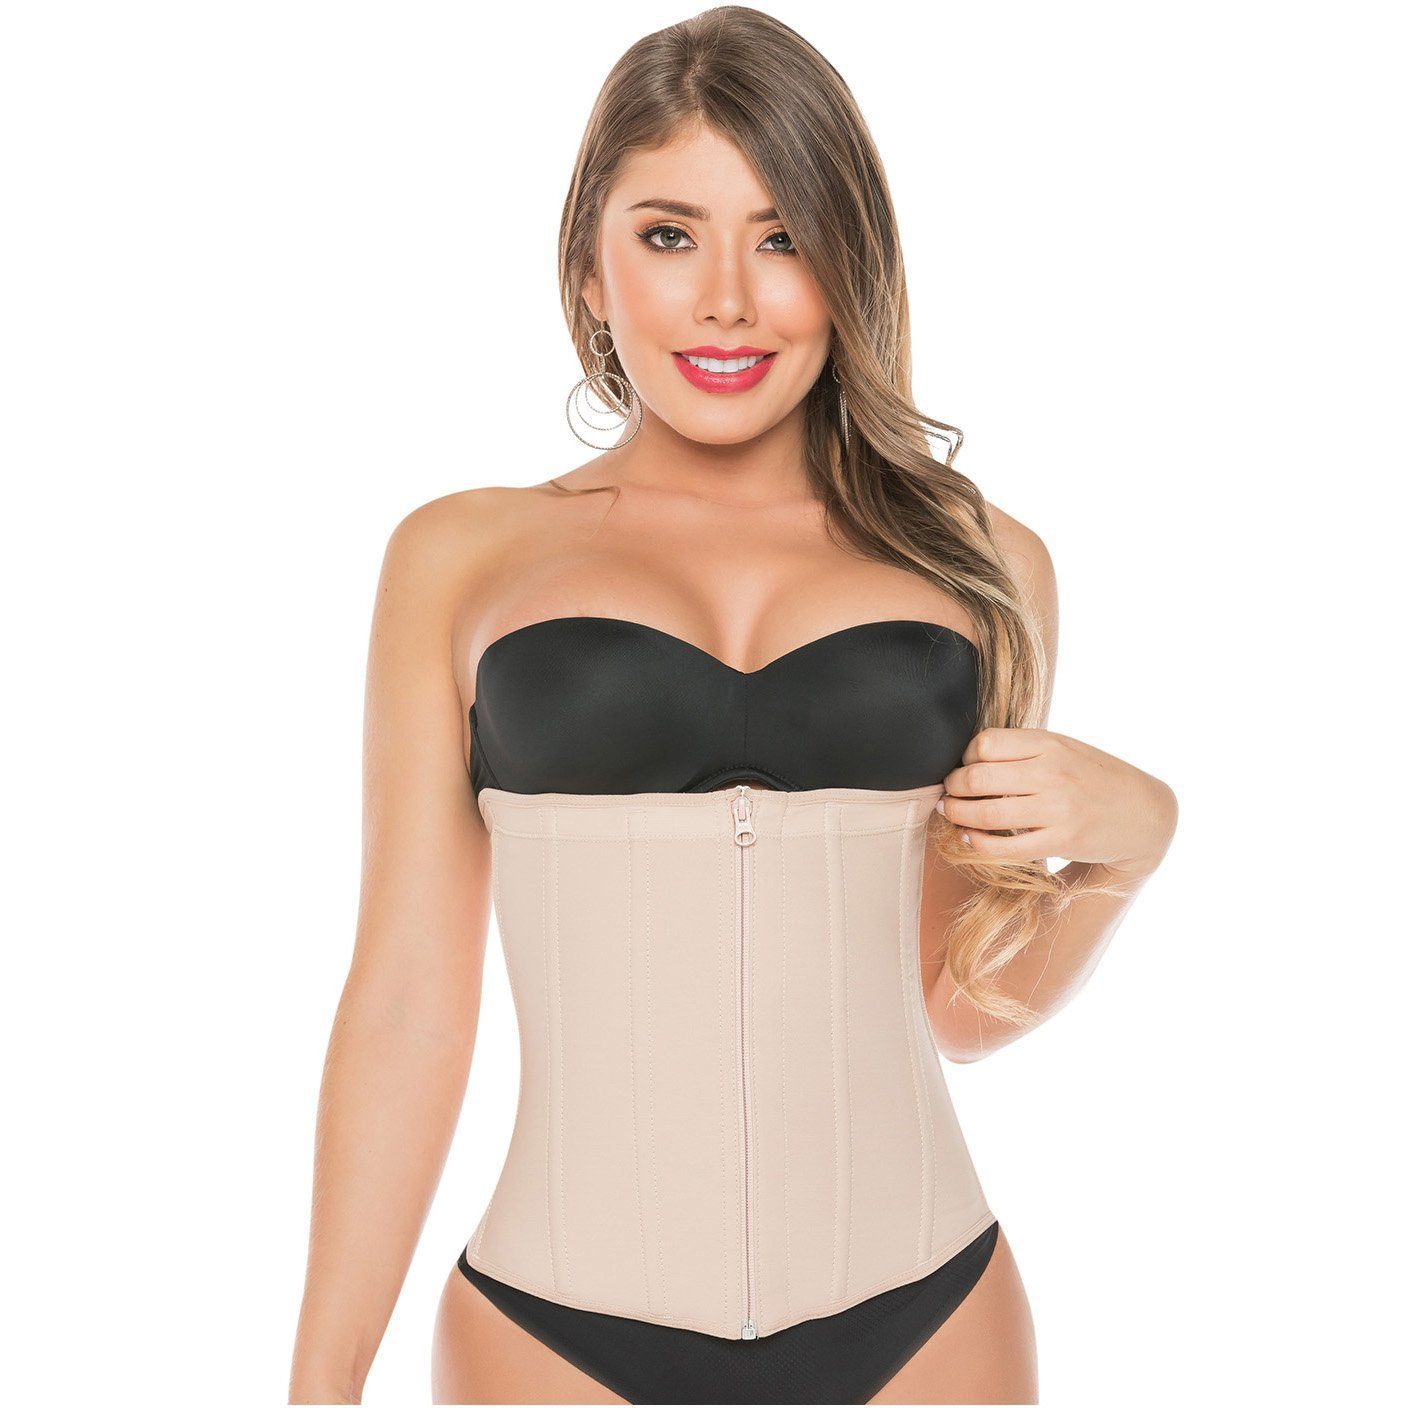 Fajas Colombiana Salome Colombian Waist Trainer Post Surgical Slim